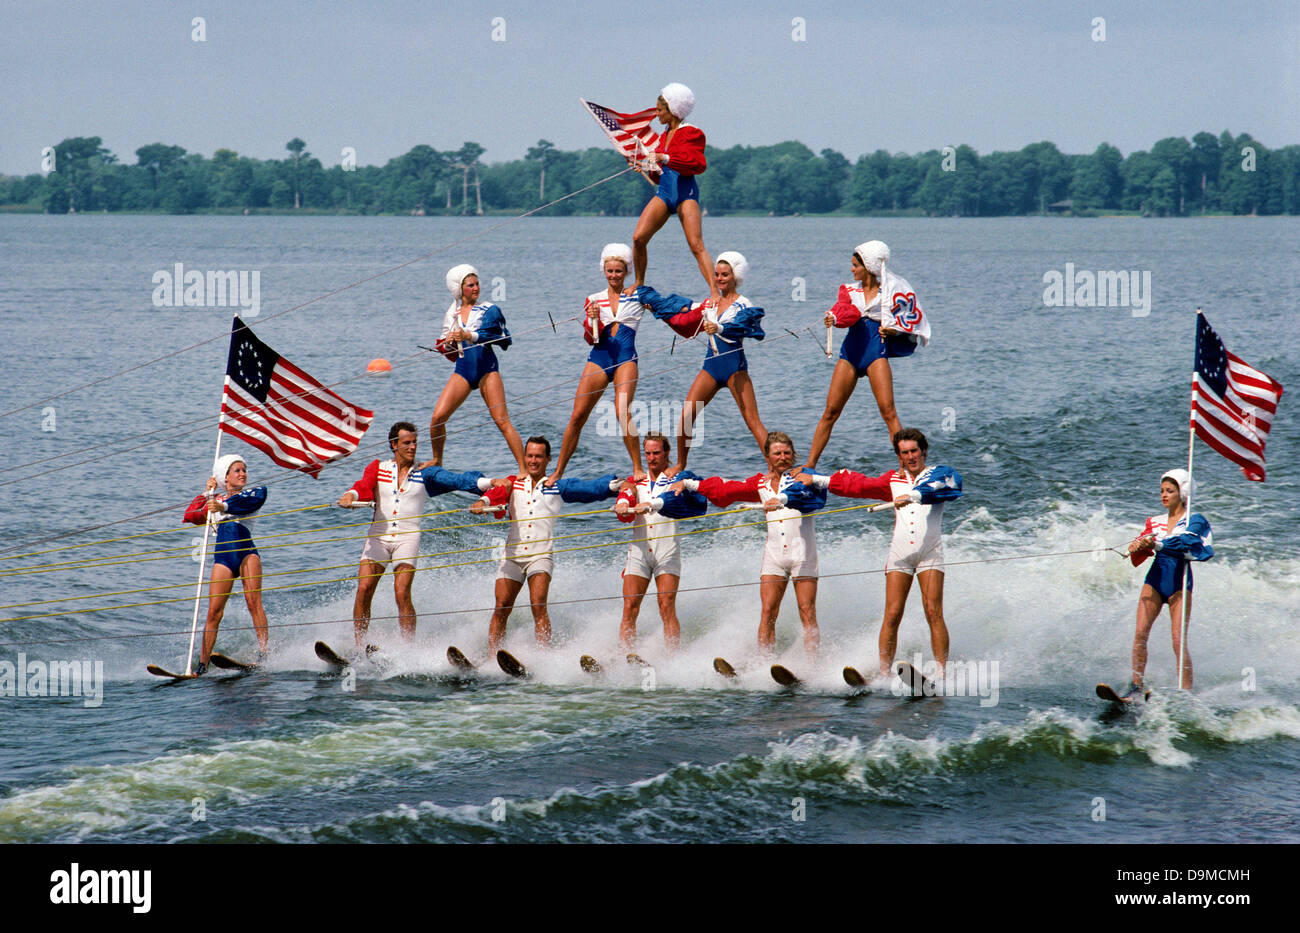 Water Ski Shows With Human Pyramids Like This One Photographed In D9MCMH 